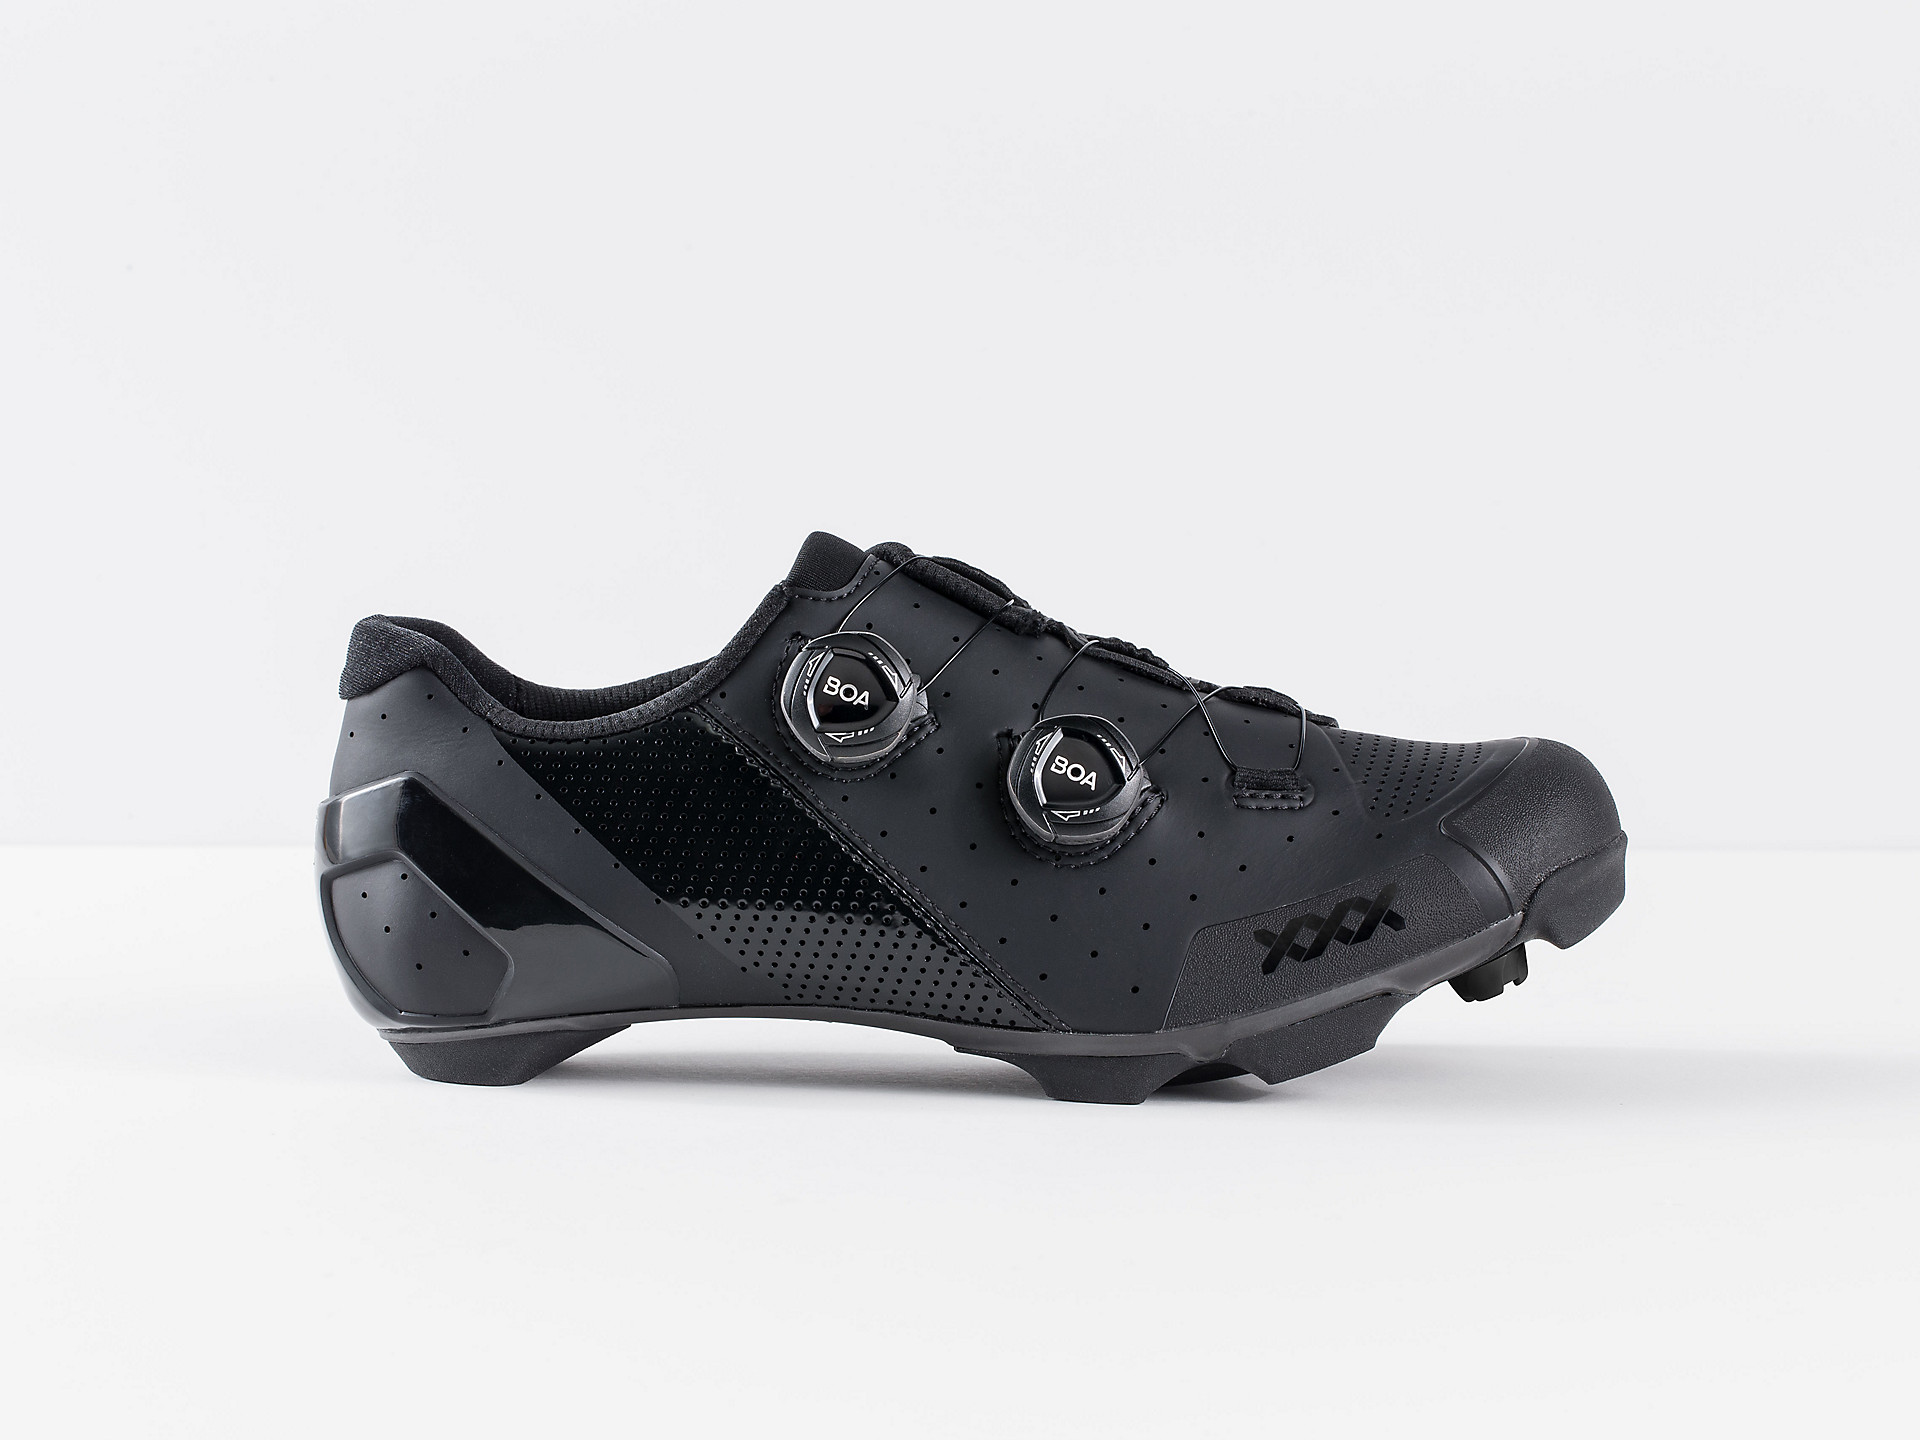 <a href="https://cycles-clement.be/product/chaussures-bont-xxx-mtb-41-black/">CHAUSSURES BONT XXX MTB 41 BLACK</a>